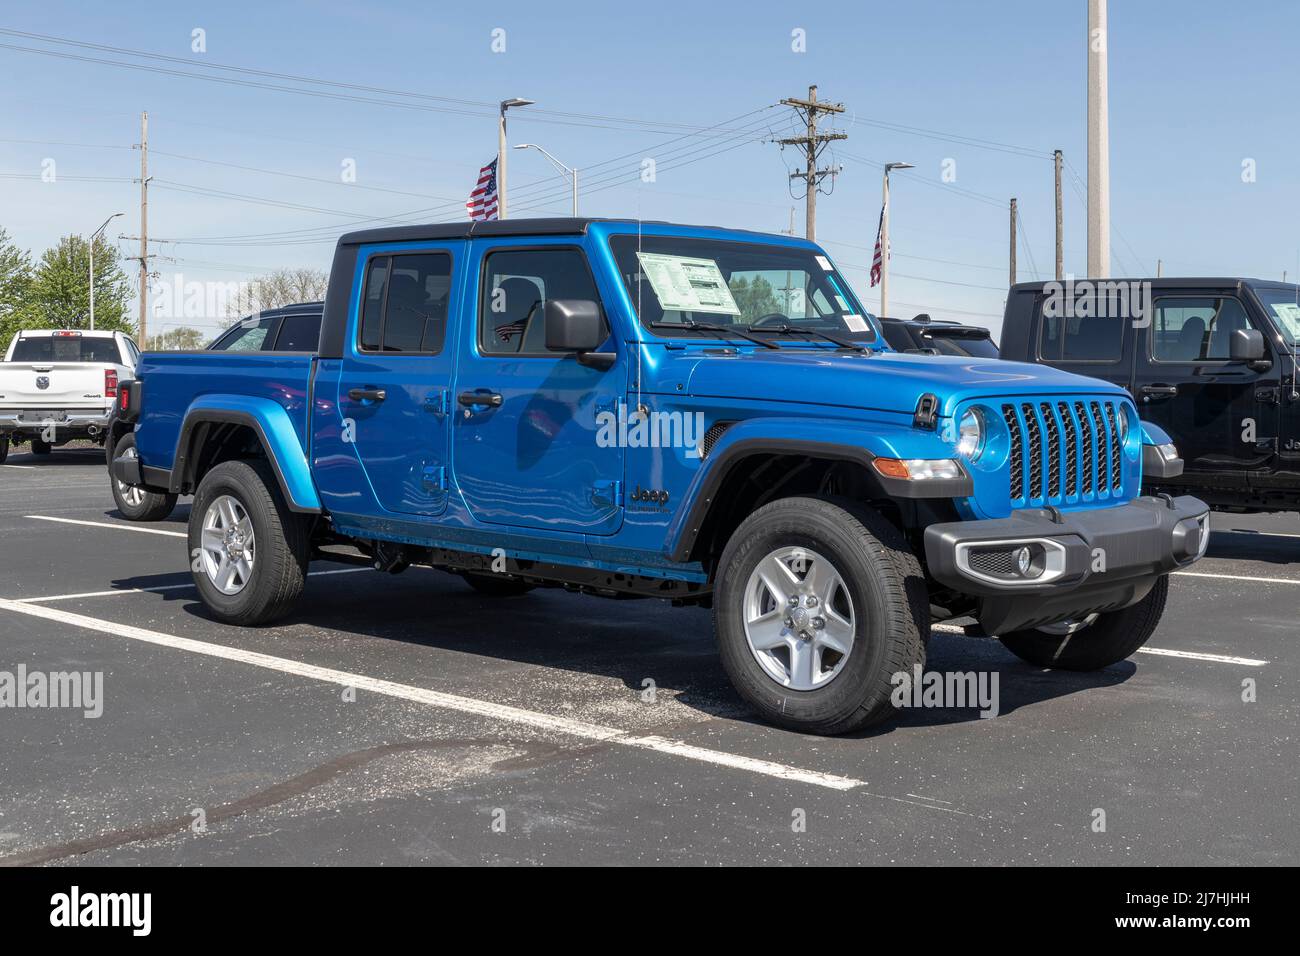 Noblesville - Circa May 2022: Jeep Gladiator display at a Stellantis dealer. The Jeep Gladiator models include the Sport, Willys, Rubicon and Mojave. Stock Photo